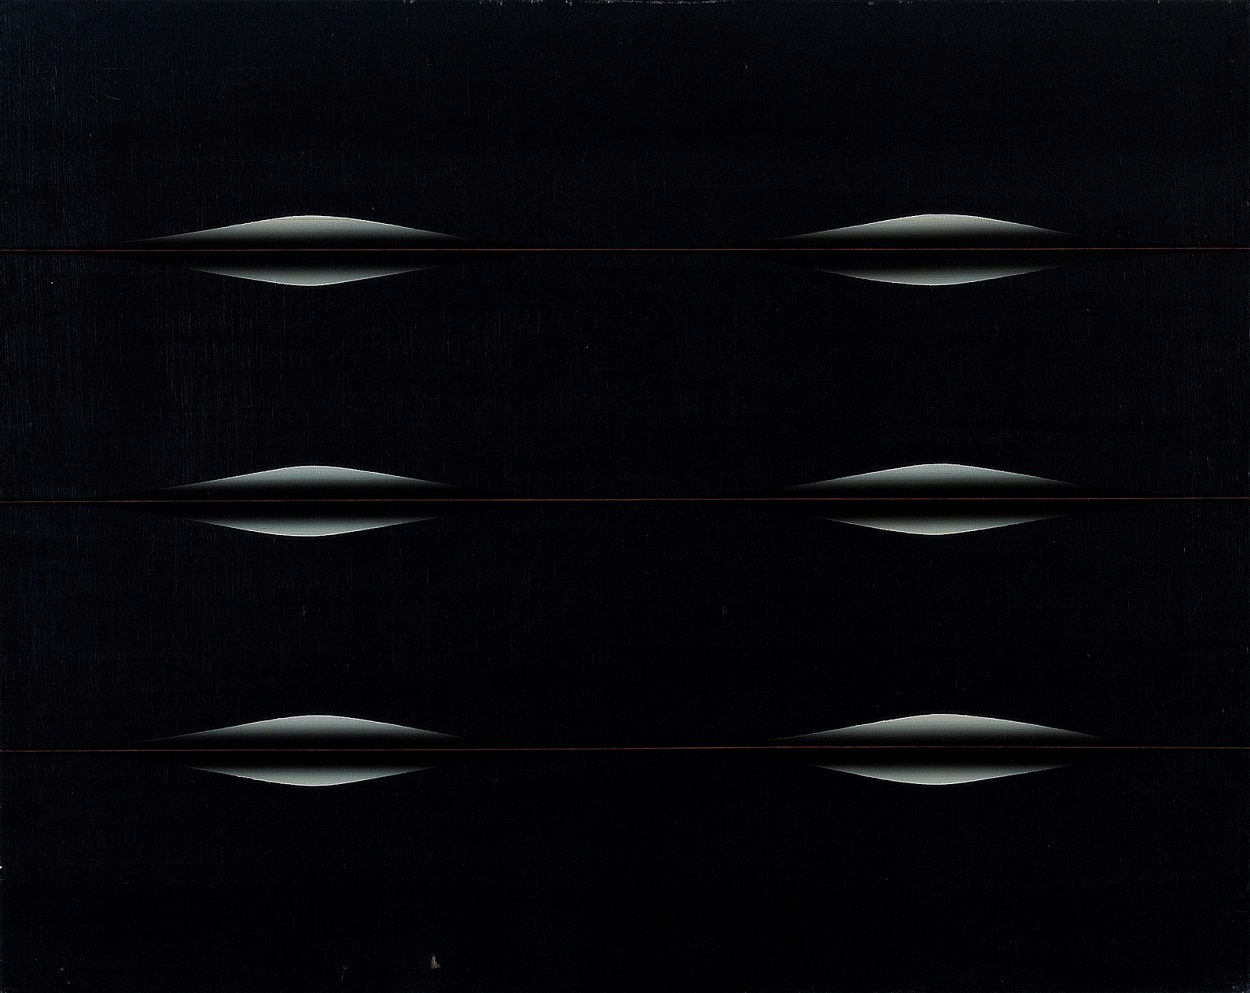 Space84120-1, 72.5×90.5㎝, Oil on Canvas, 1984